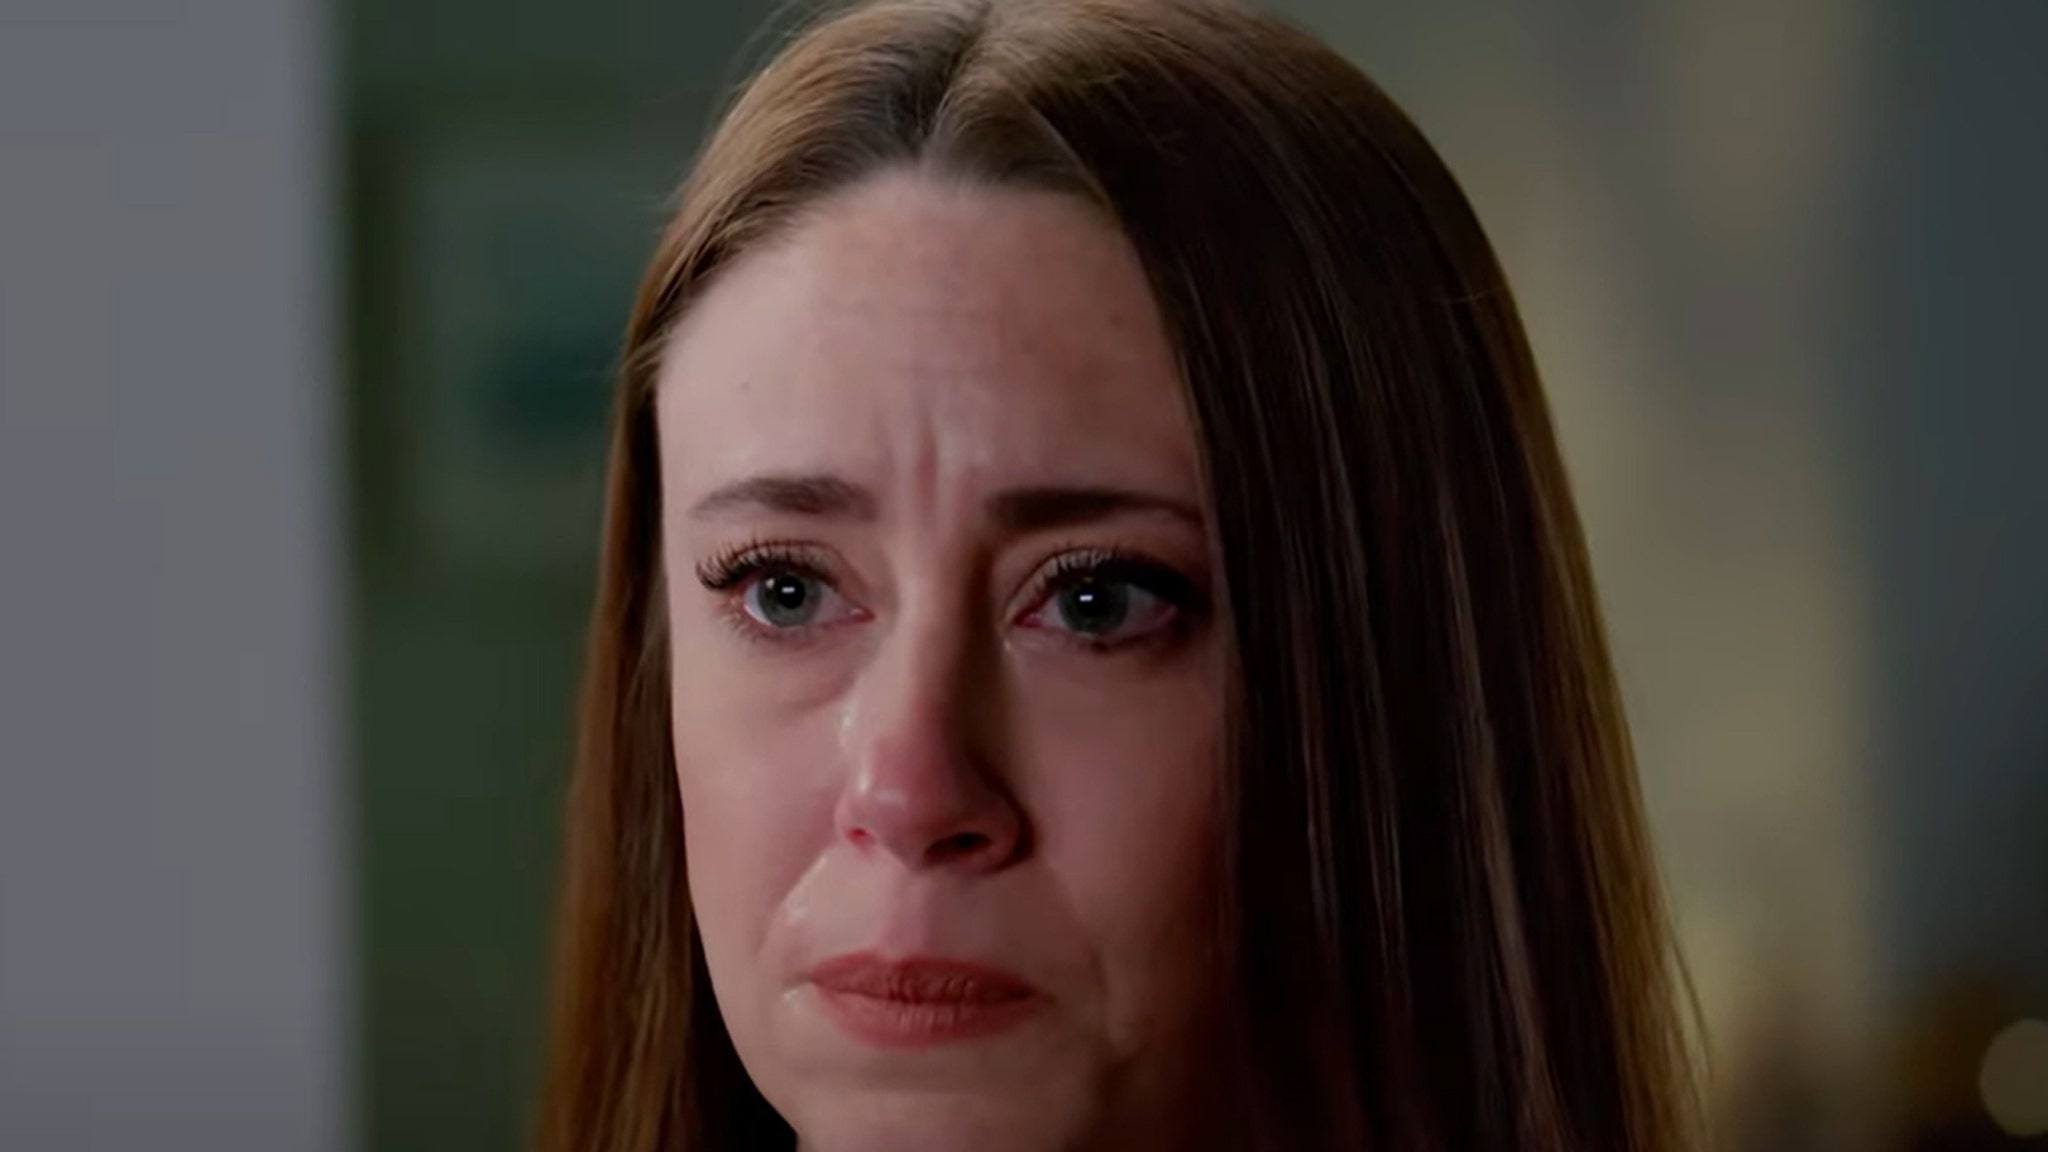 Casey Anthony In New Peacock Documentary: 'I Lied, But No One Asked Why'